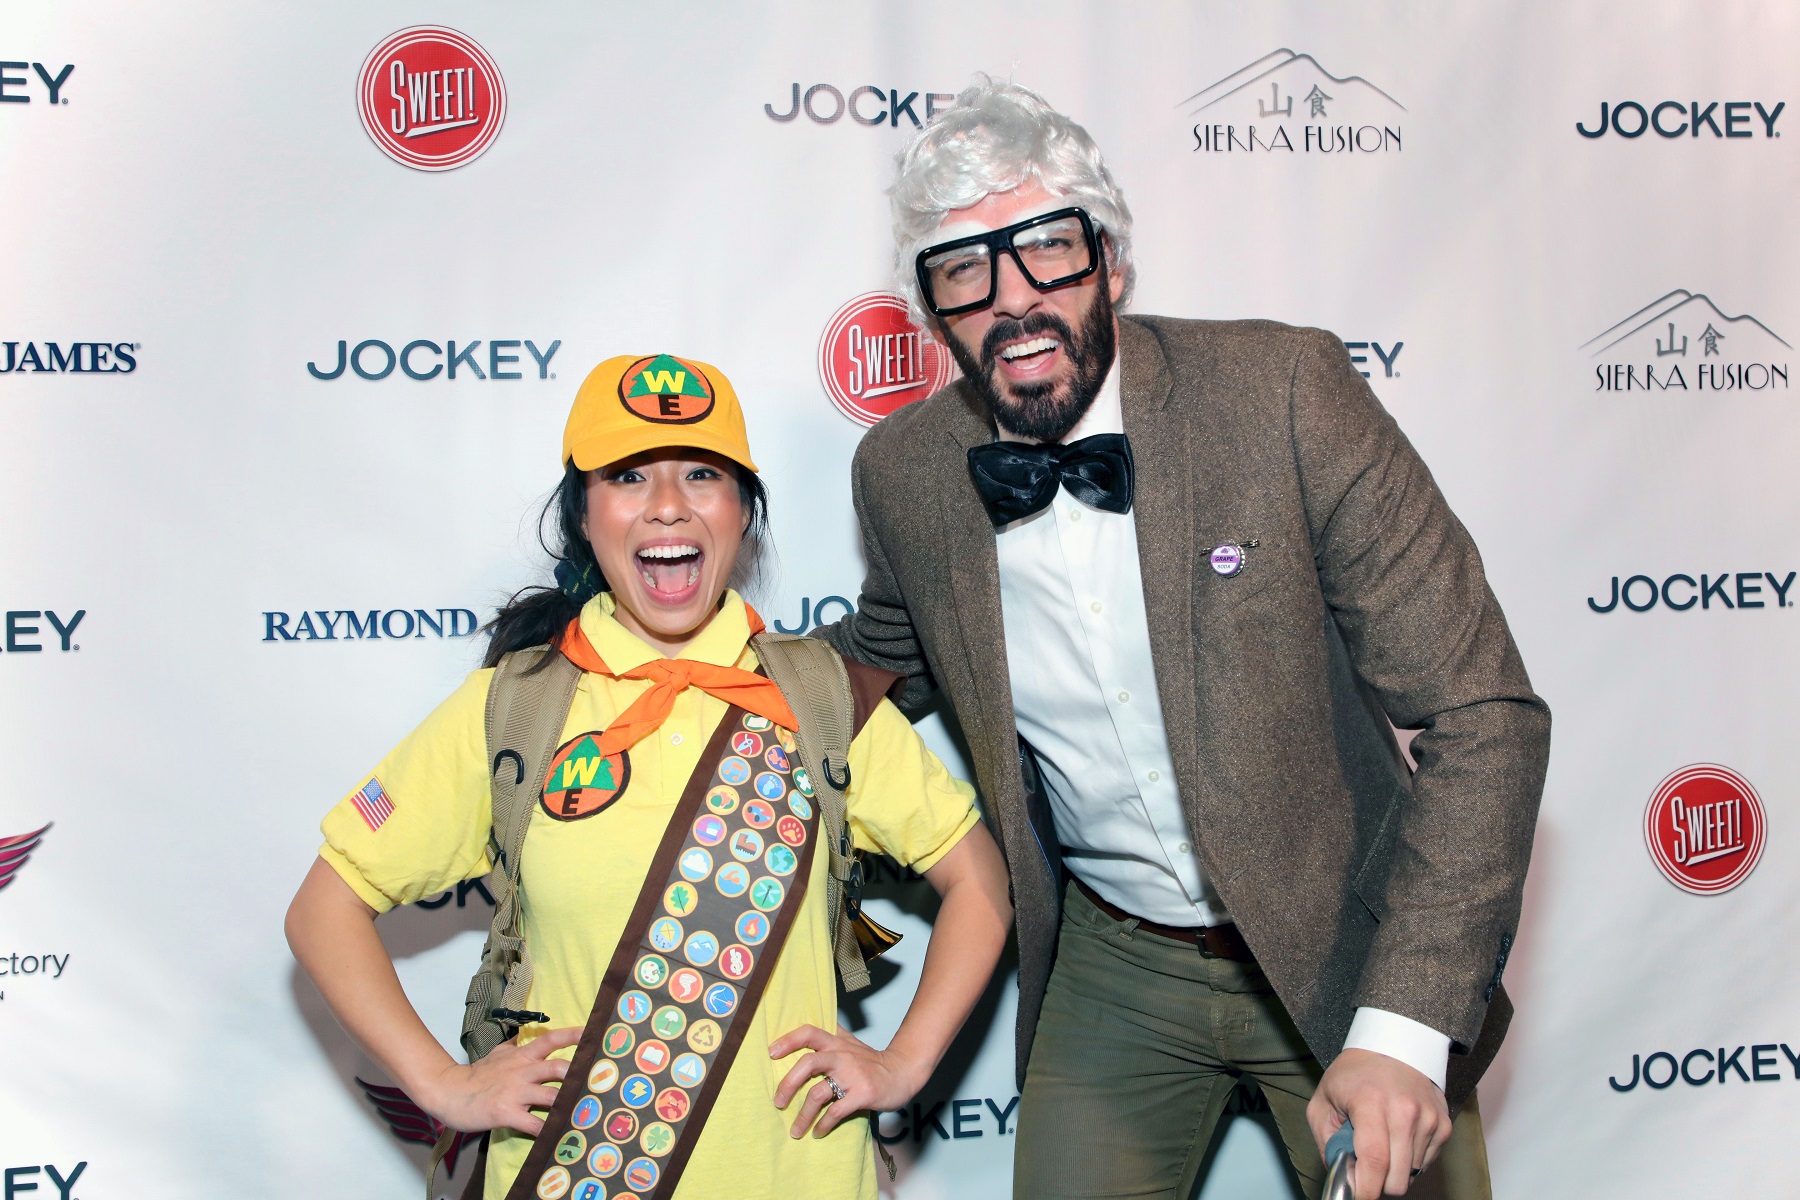 Property Brothers star Drew Scott, left, dressed in an Albert Einstein costume, and wife Linda Phan, left, dressed in a Girl Scout costume